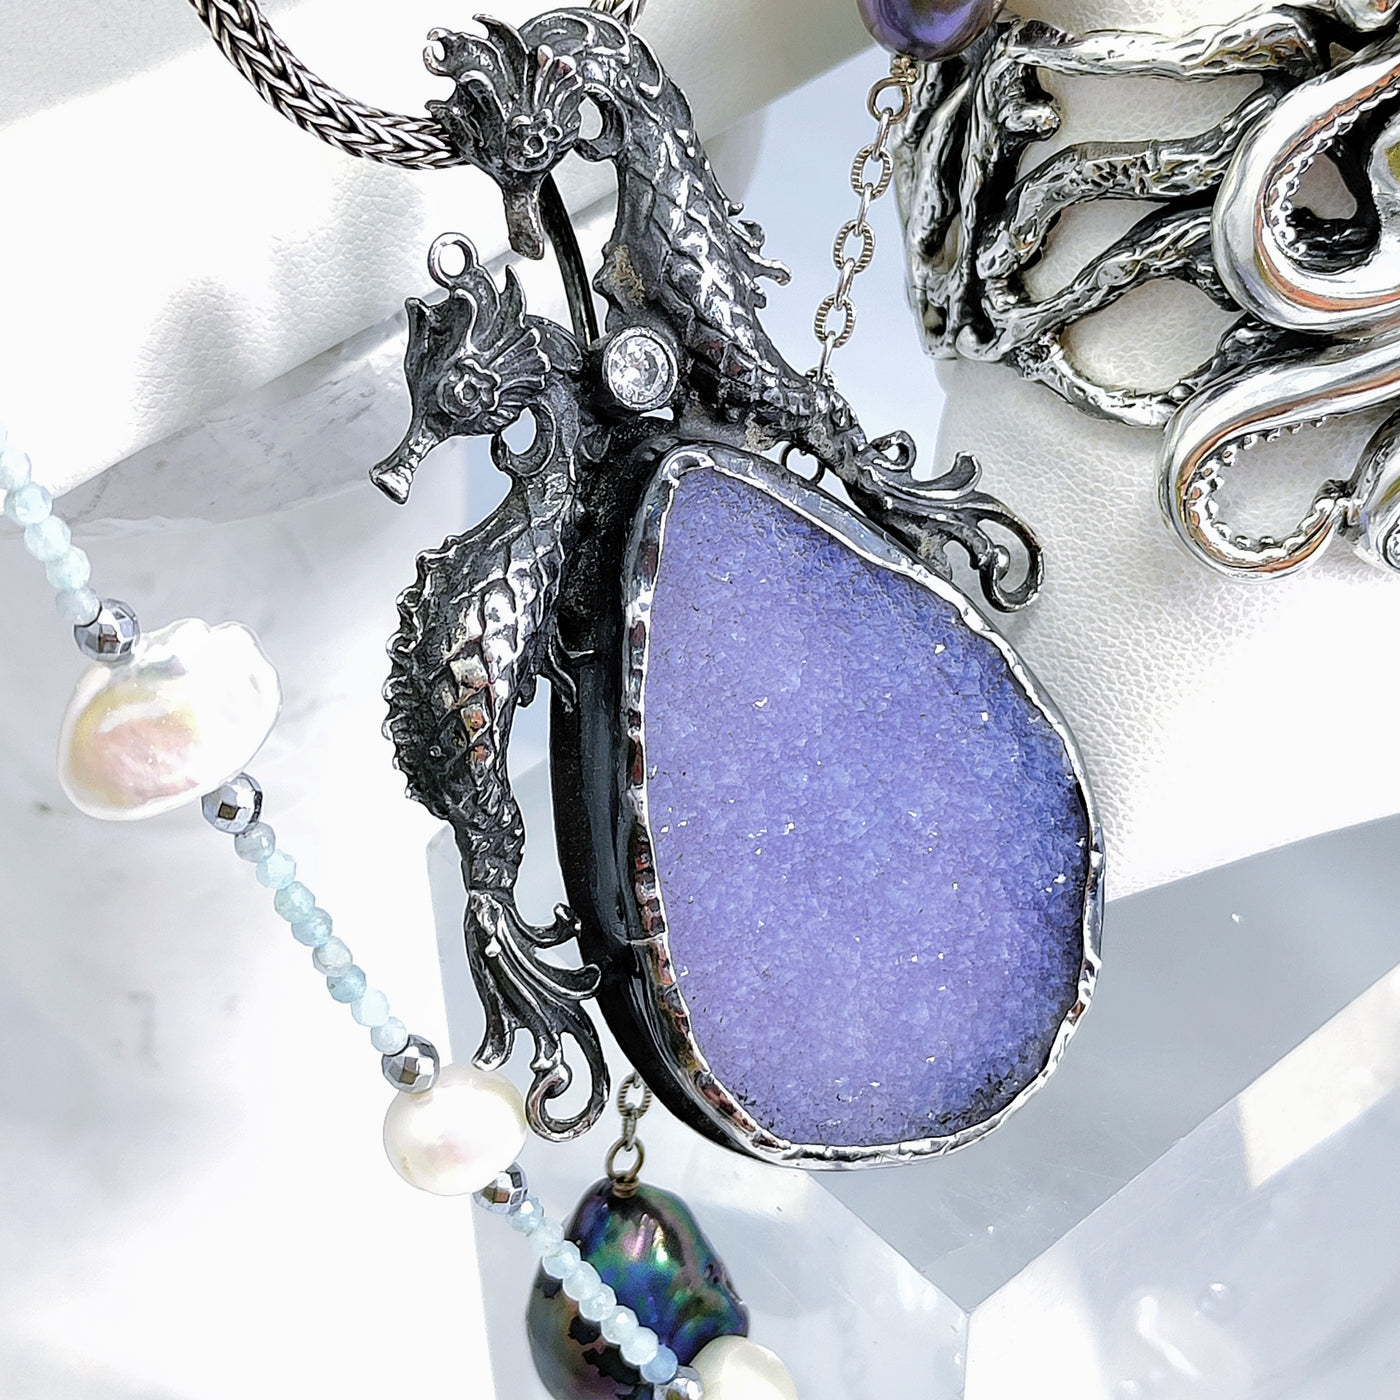 "Sparkle of the Sea" 24"  Pendant Necklace - Druzy, Sterling